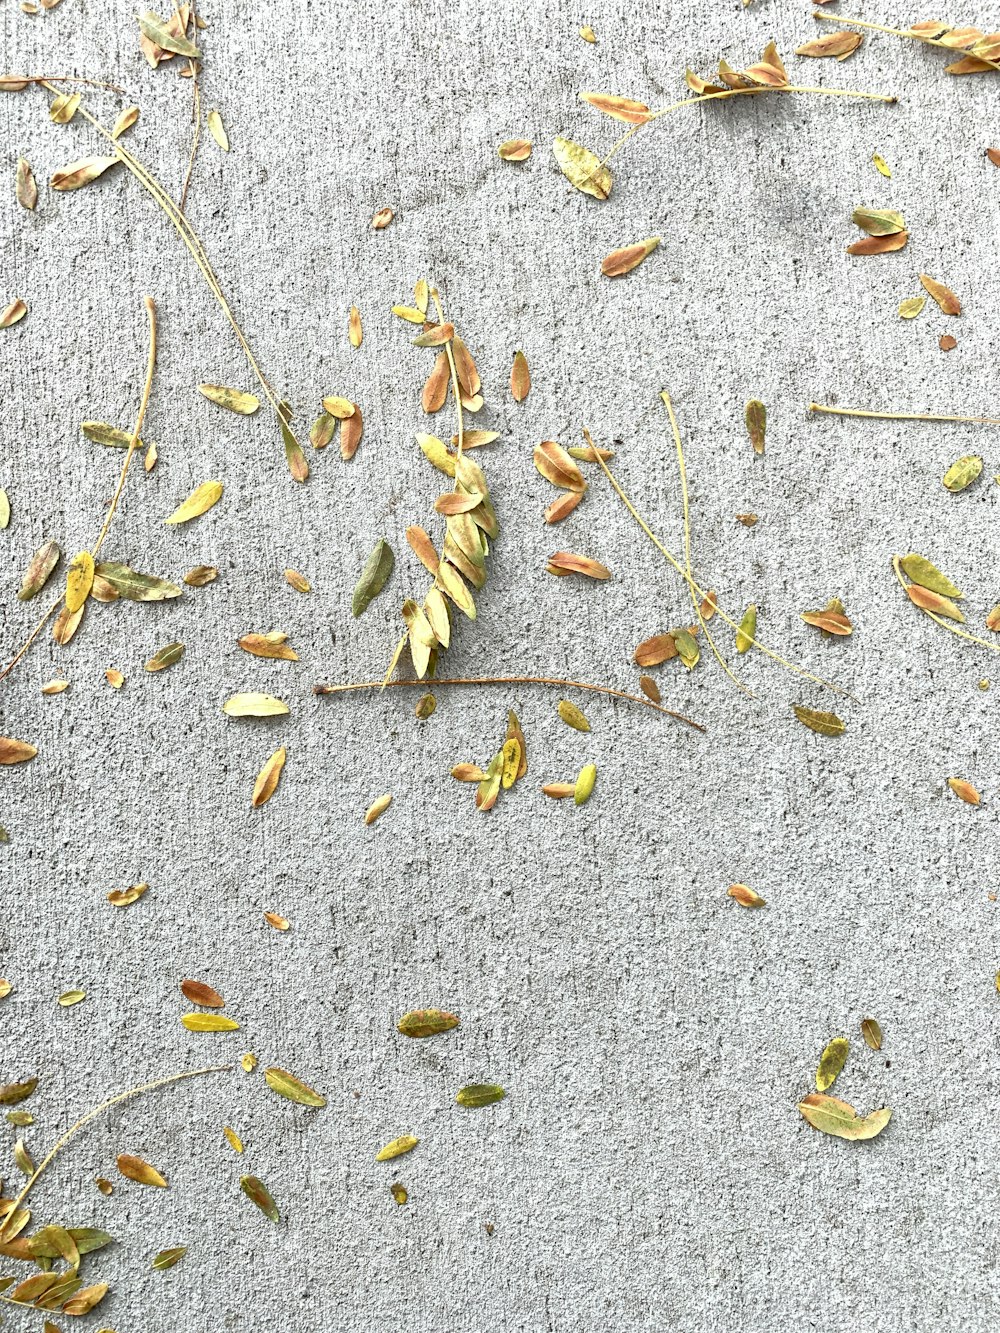 green and yellow leaves on pavement